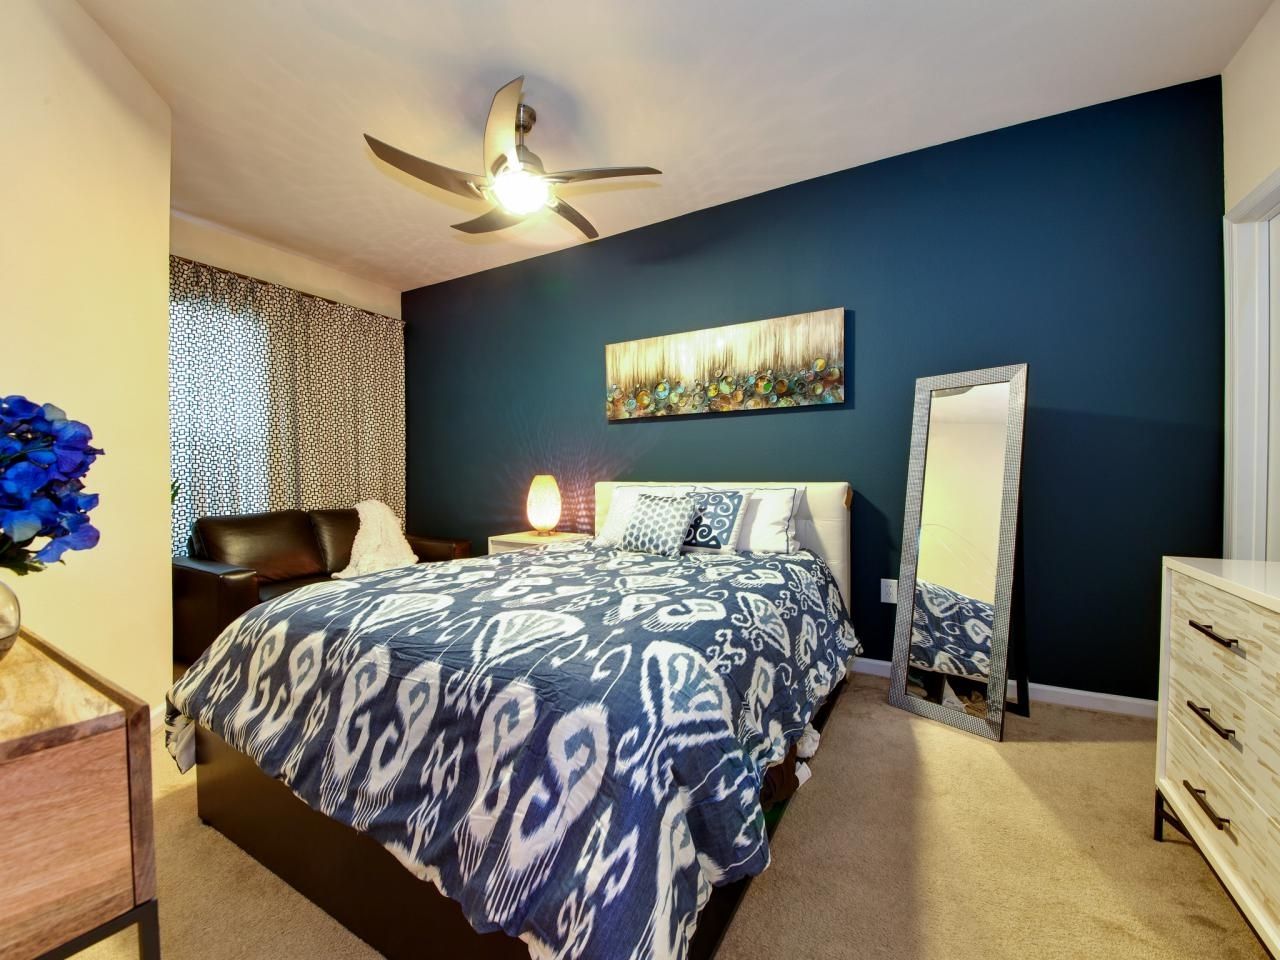 Navy Blue Wall Accent With Wheat Color Base Combination Throughout Navy Wall Accents (View 10 of 15)